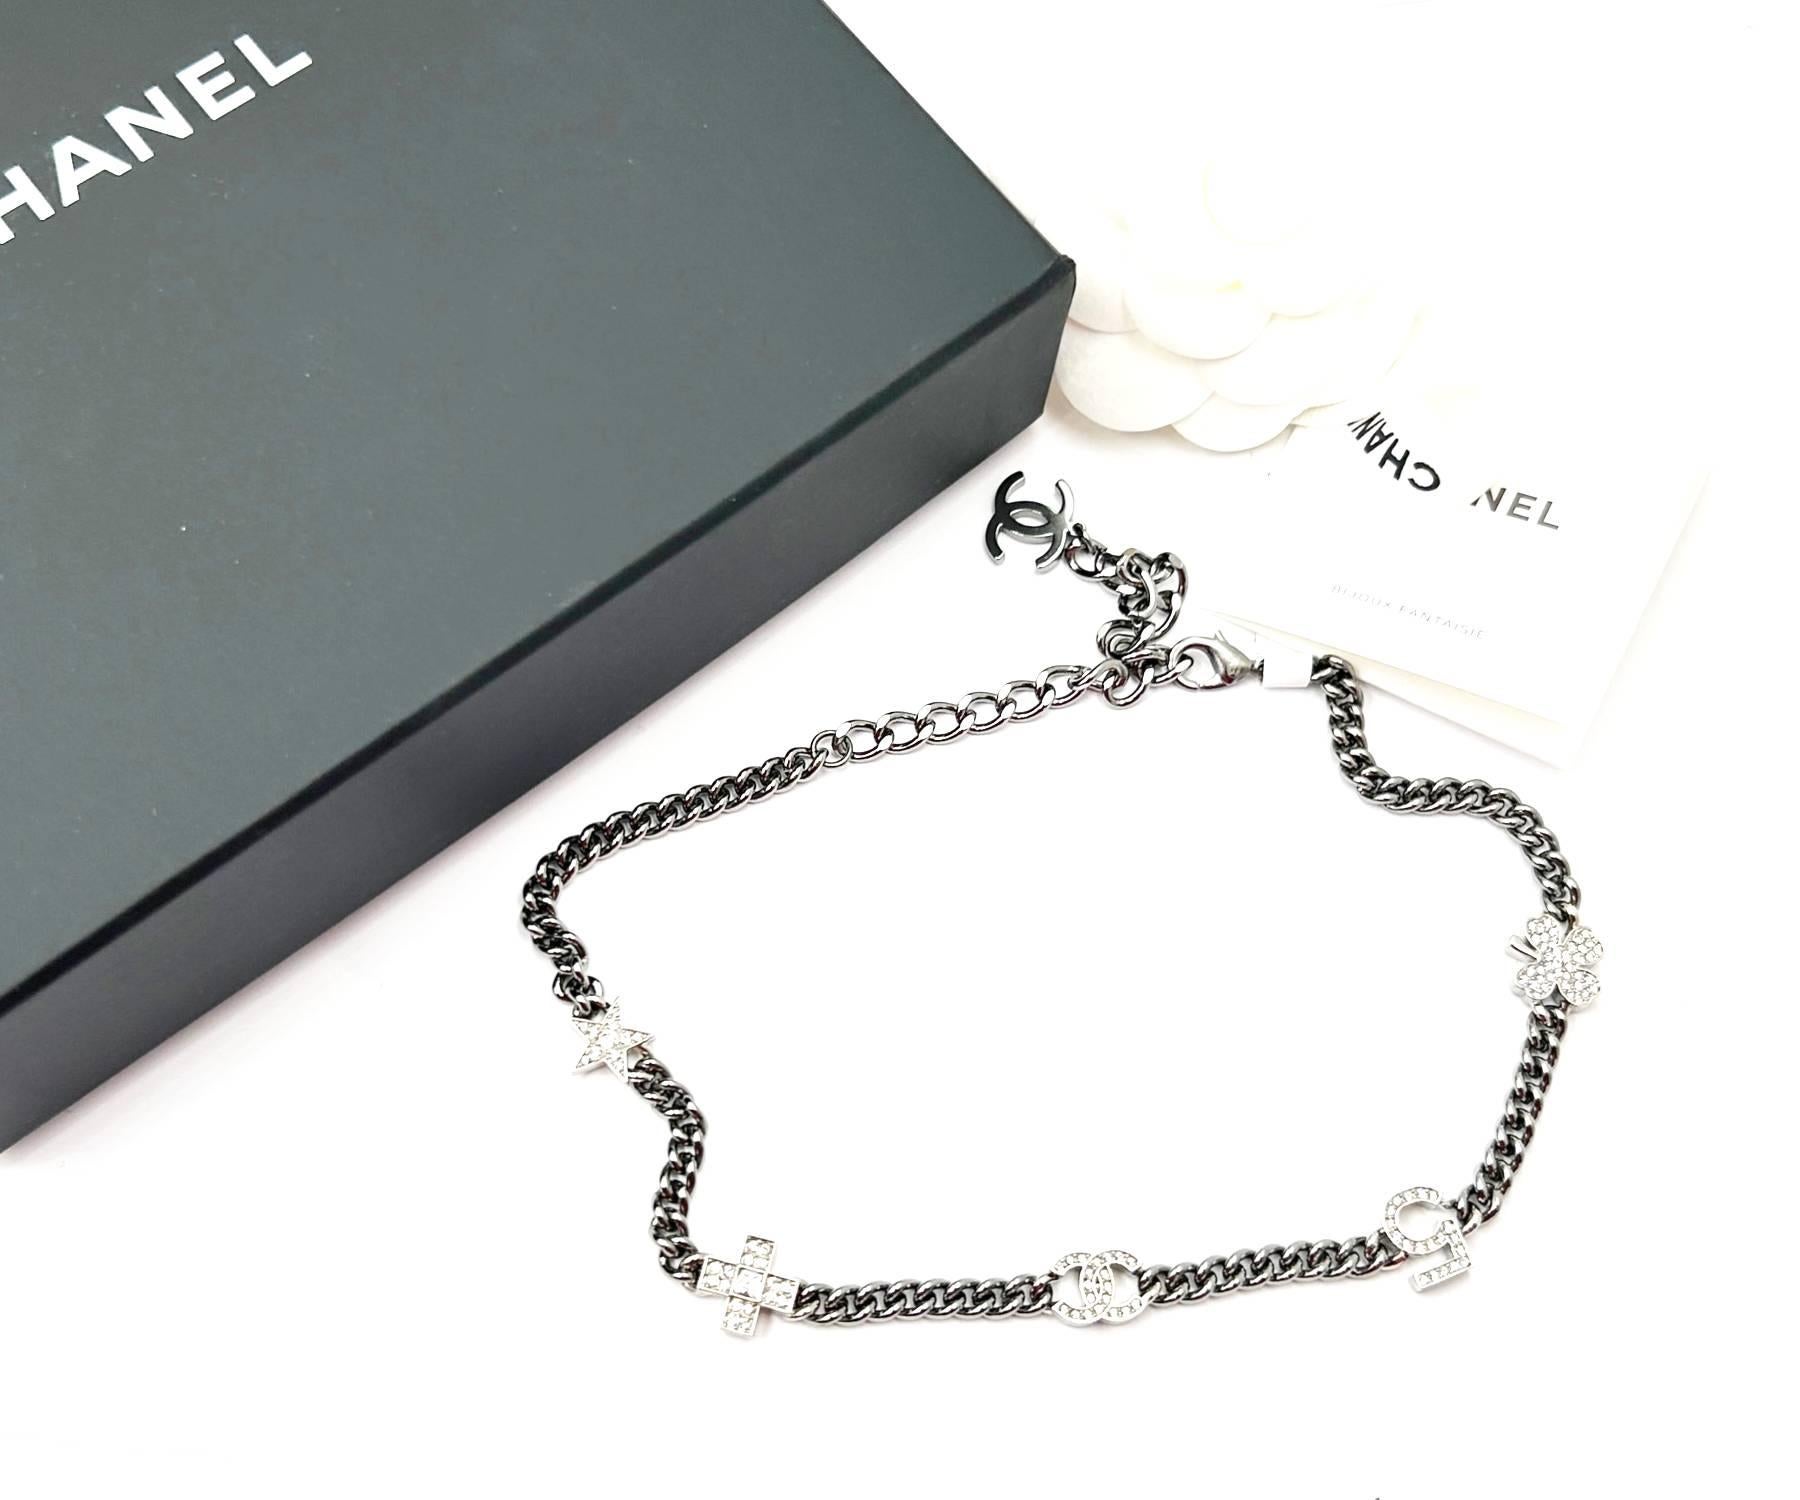 chanel necklace choker